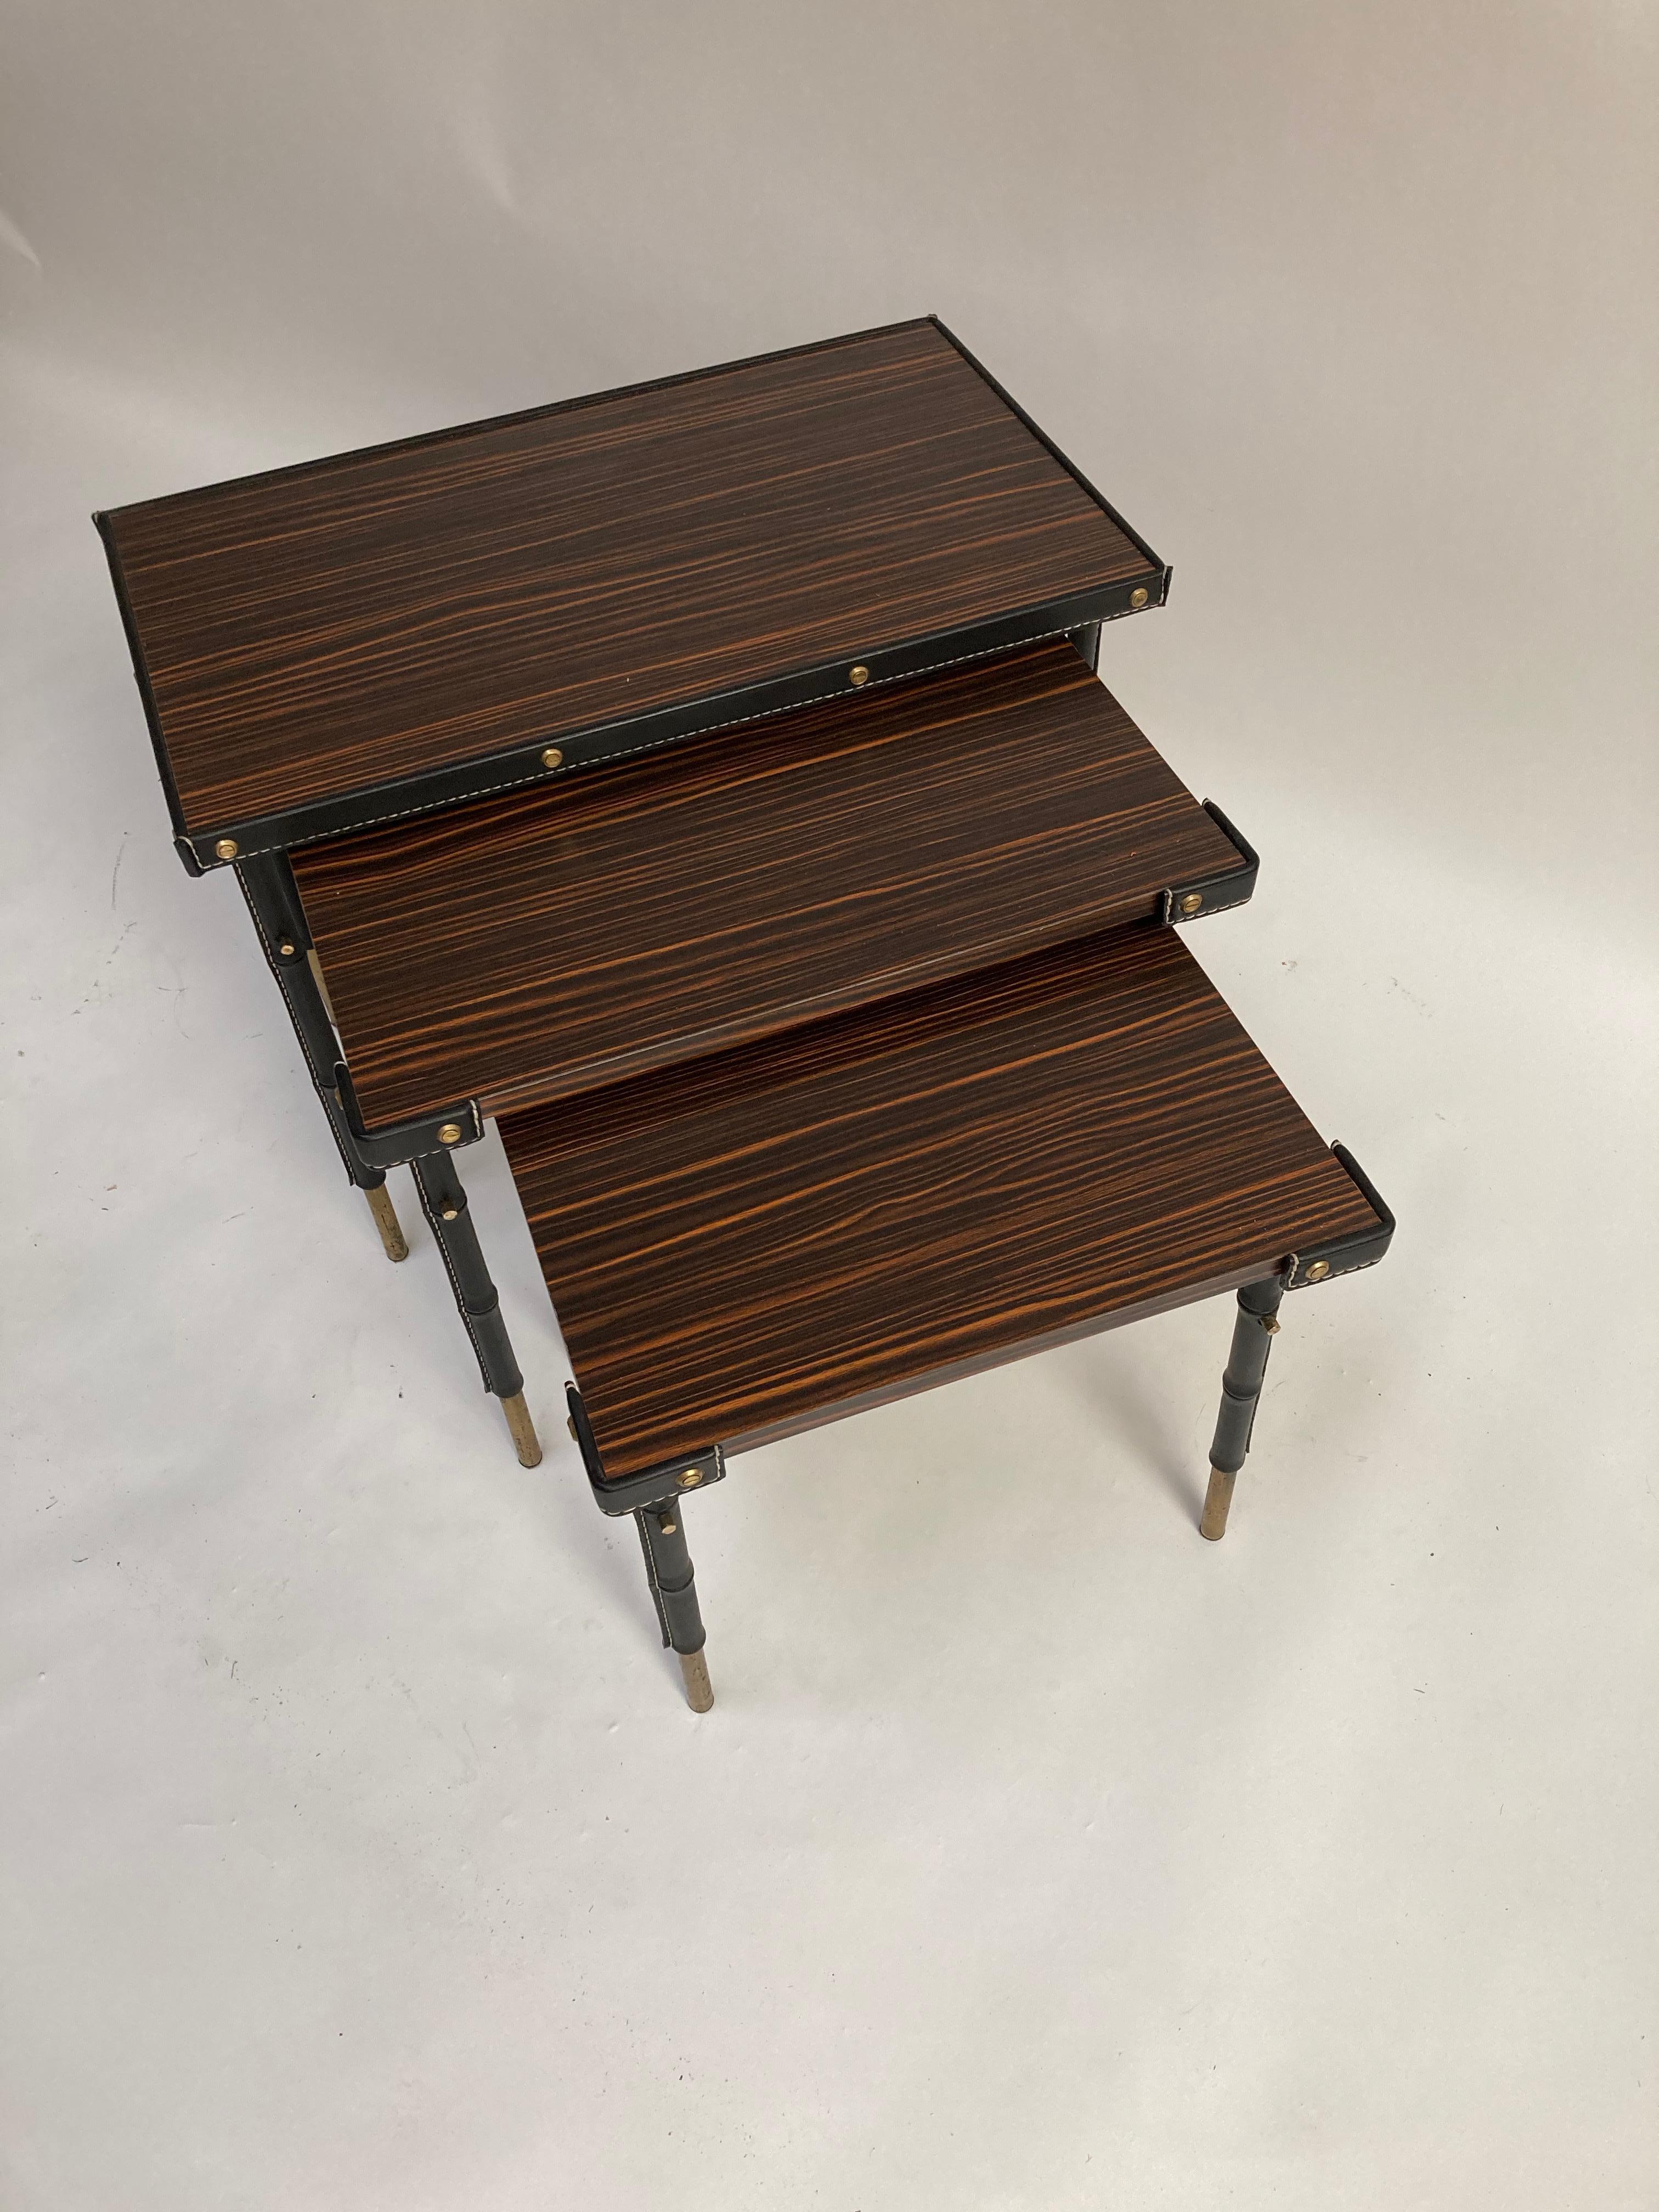 1950's stitched leather nesting tables by Jacques Adnet
Very good condition
France
Dimensions : 62 x 37 x 48
52 x 37 x 44 
37 x 42 x 40 cm.